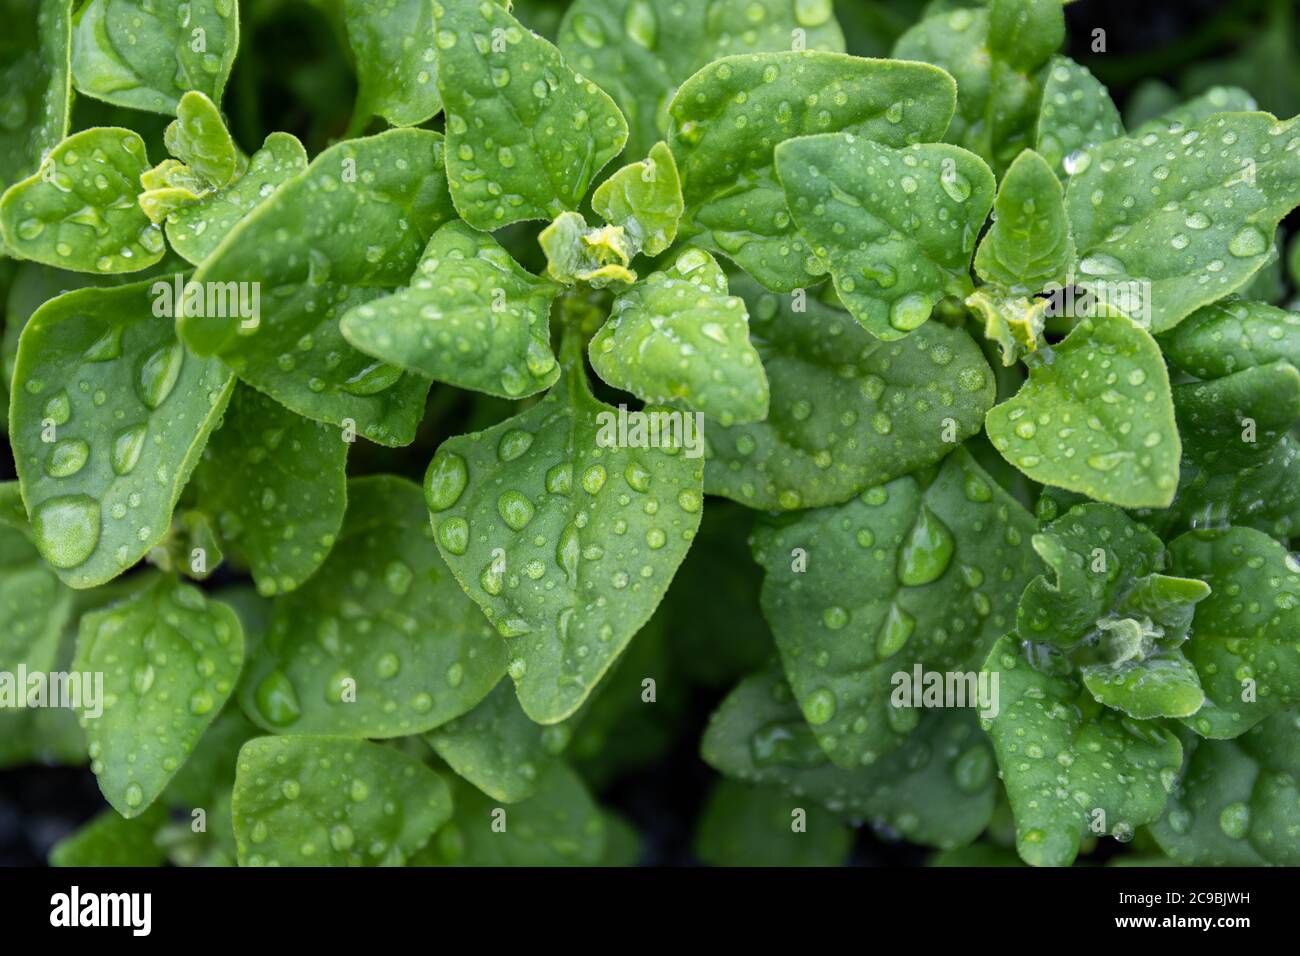 Raindrops on leaves of Tetragonia tetragonoides, commonly called New Zealand spinach or Botany Bay spinach or Cook's cabbage or kōkihi or sea spinach Stock Photo